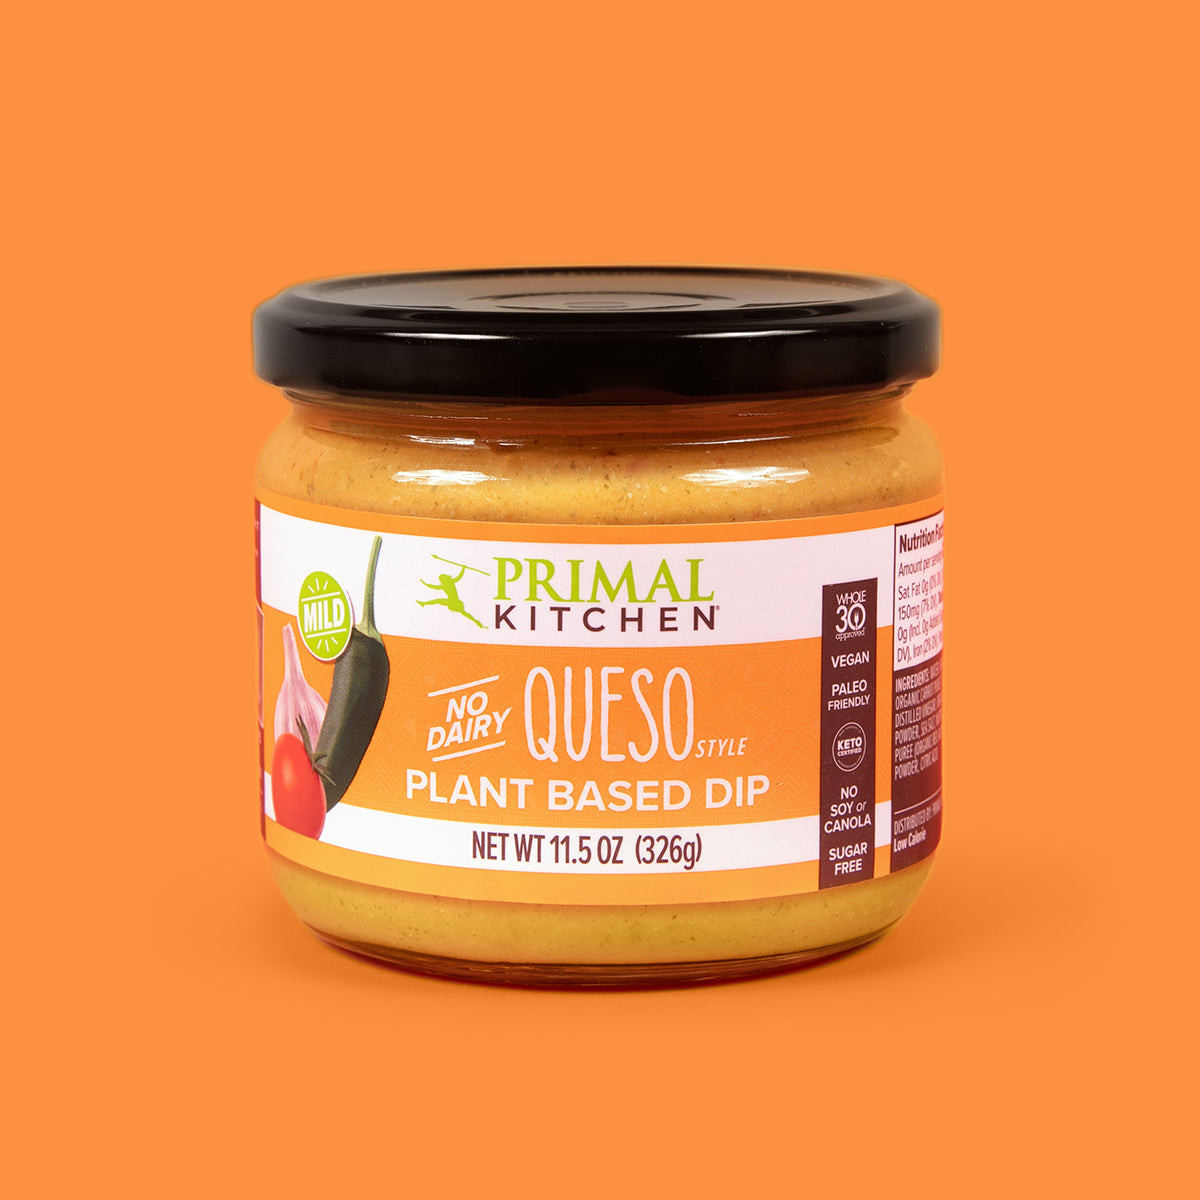 A jar of Primal Kitchen No Dairy Queso Style Plant-Based Dip with an orange label, on an orange background. 